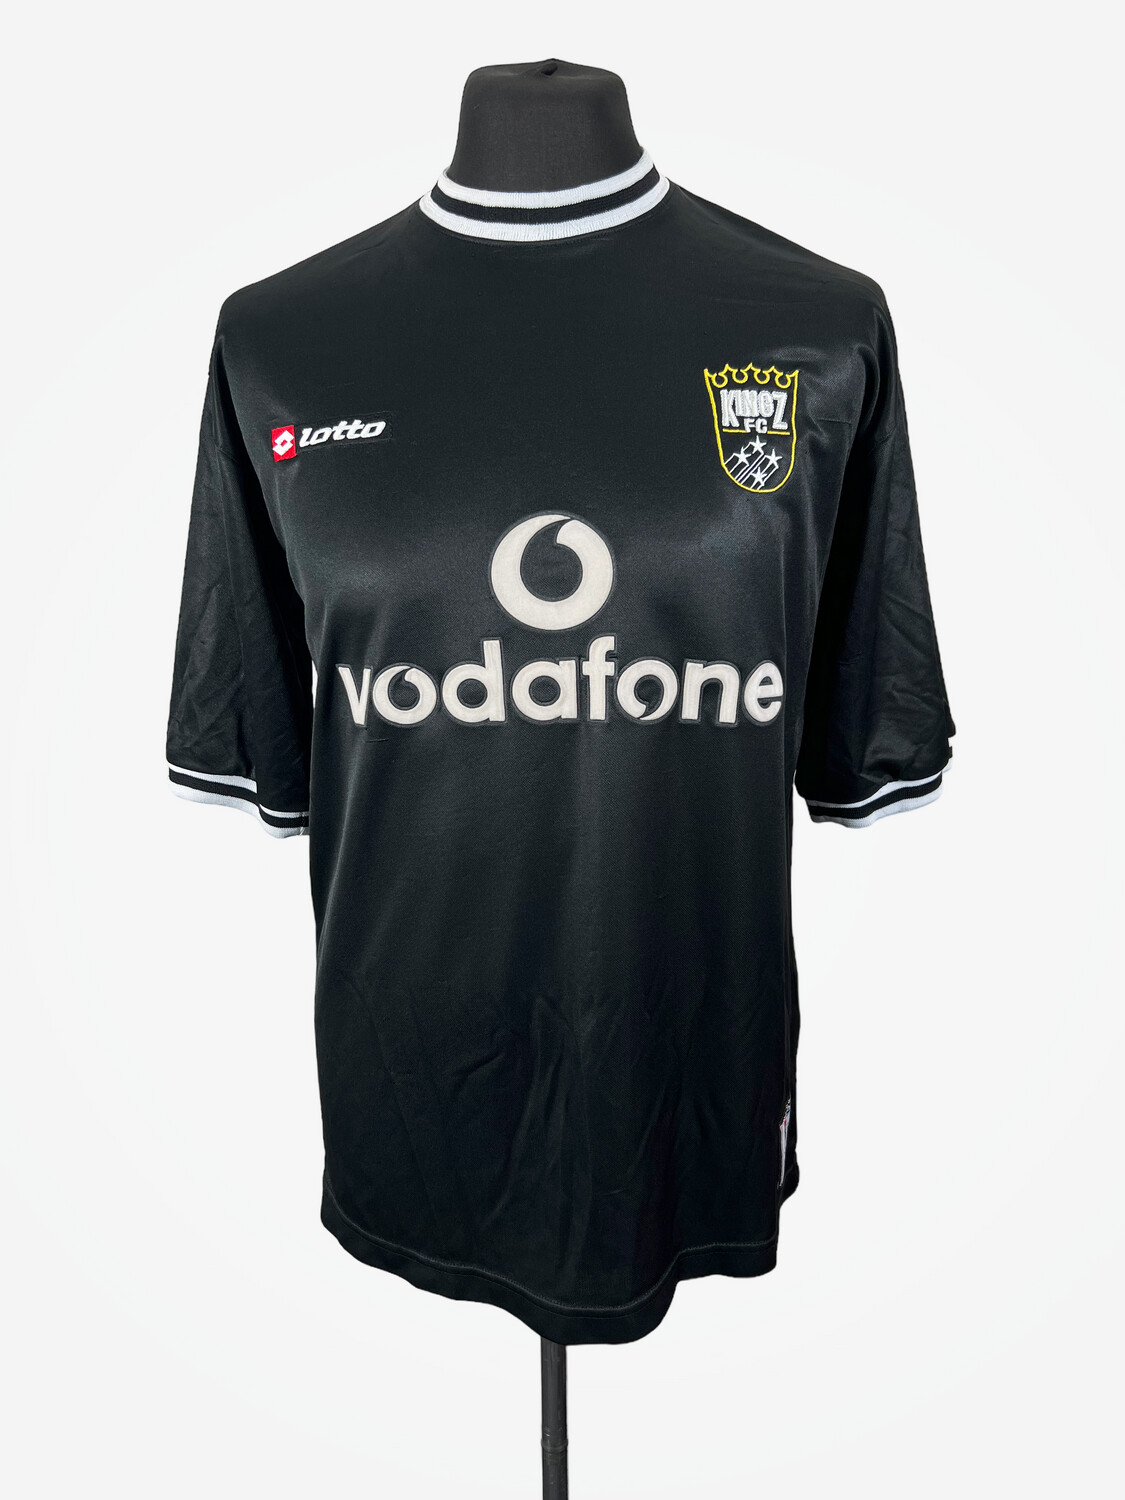 Kingz FC 2000-01 Home - Size S (M Fit)